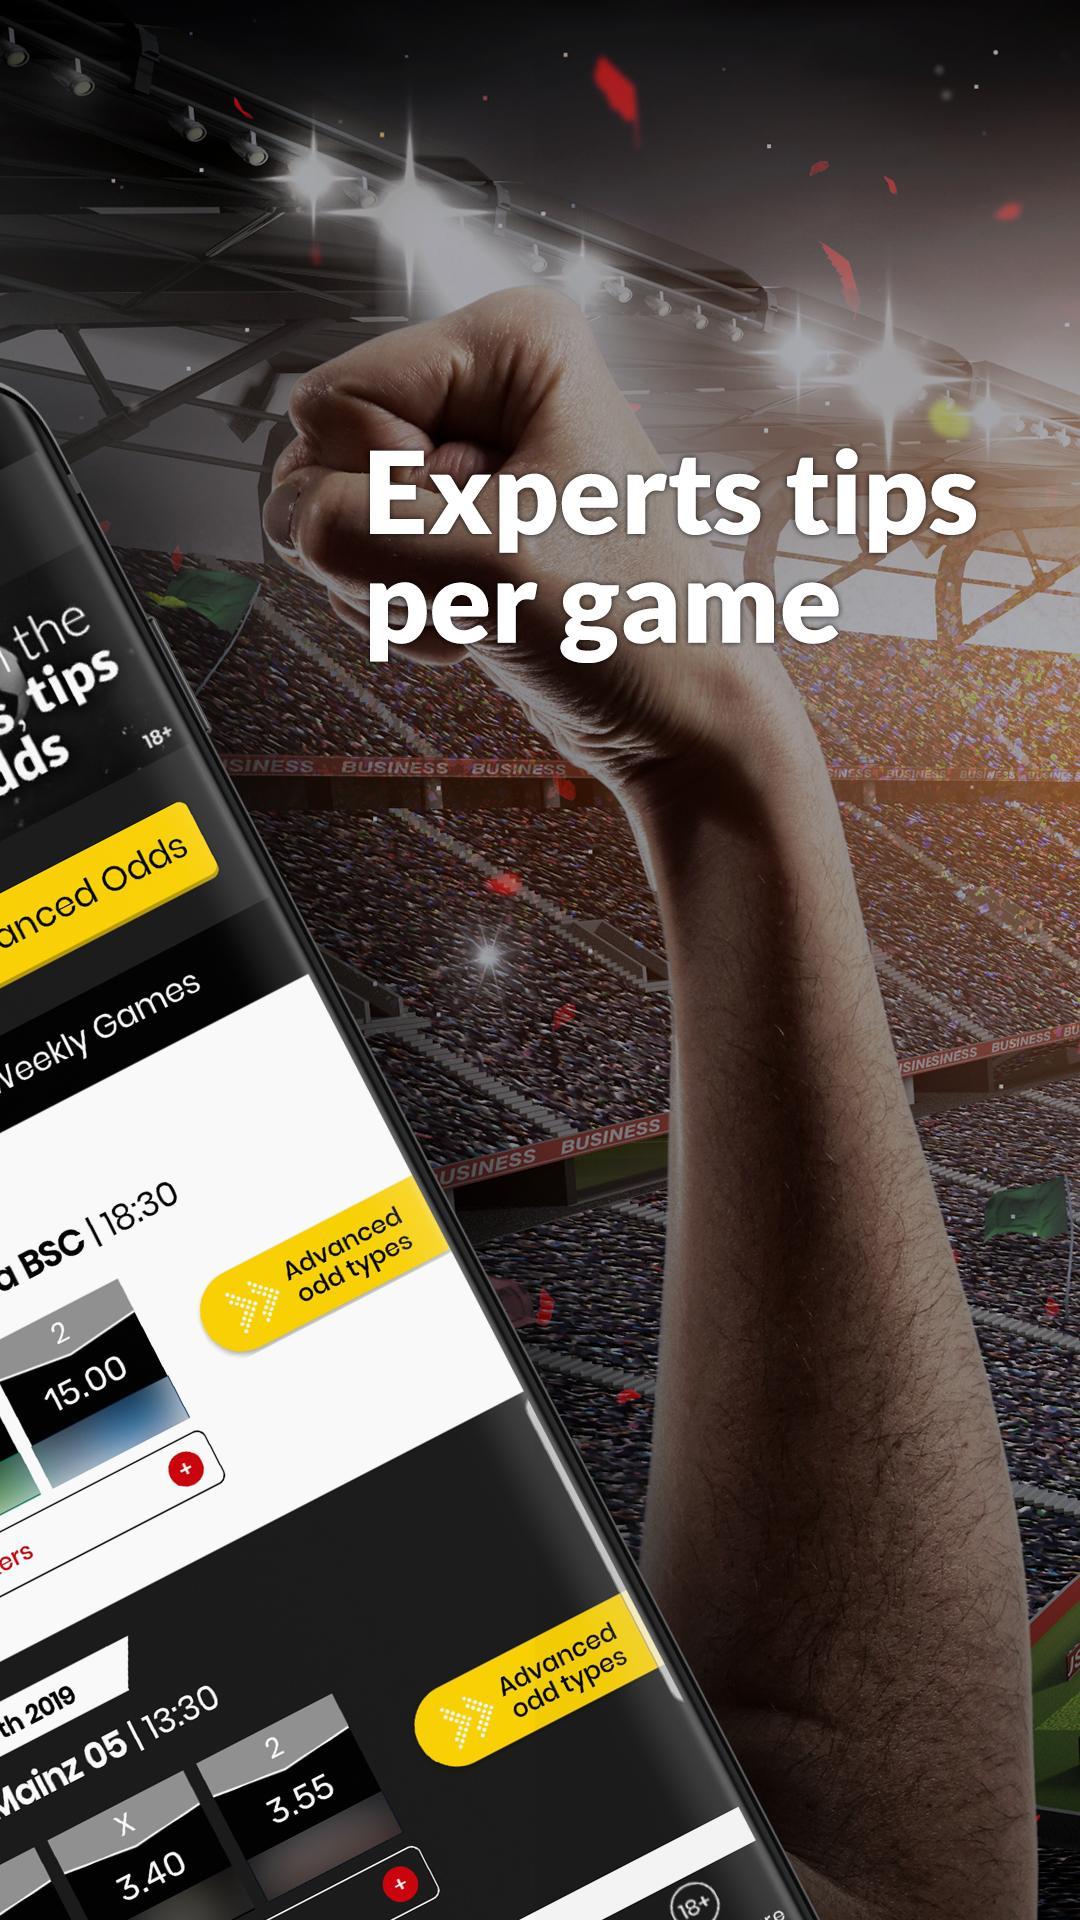 German Football League Odds Magic Checker For Android Apk Download - unfair odds roblox